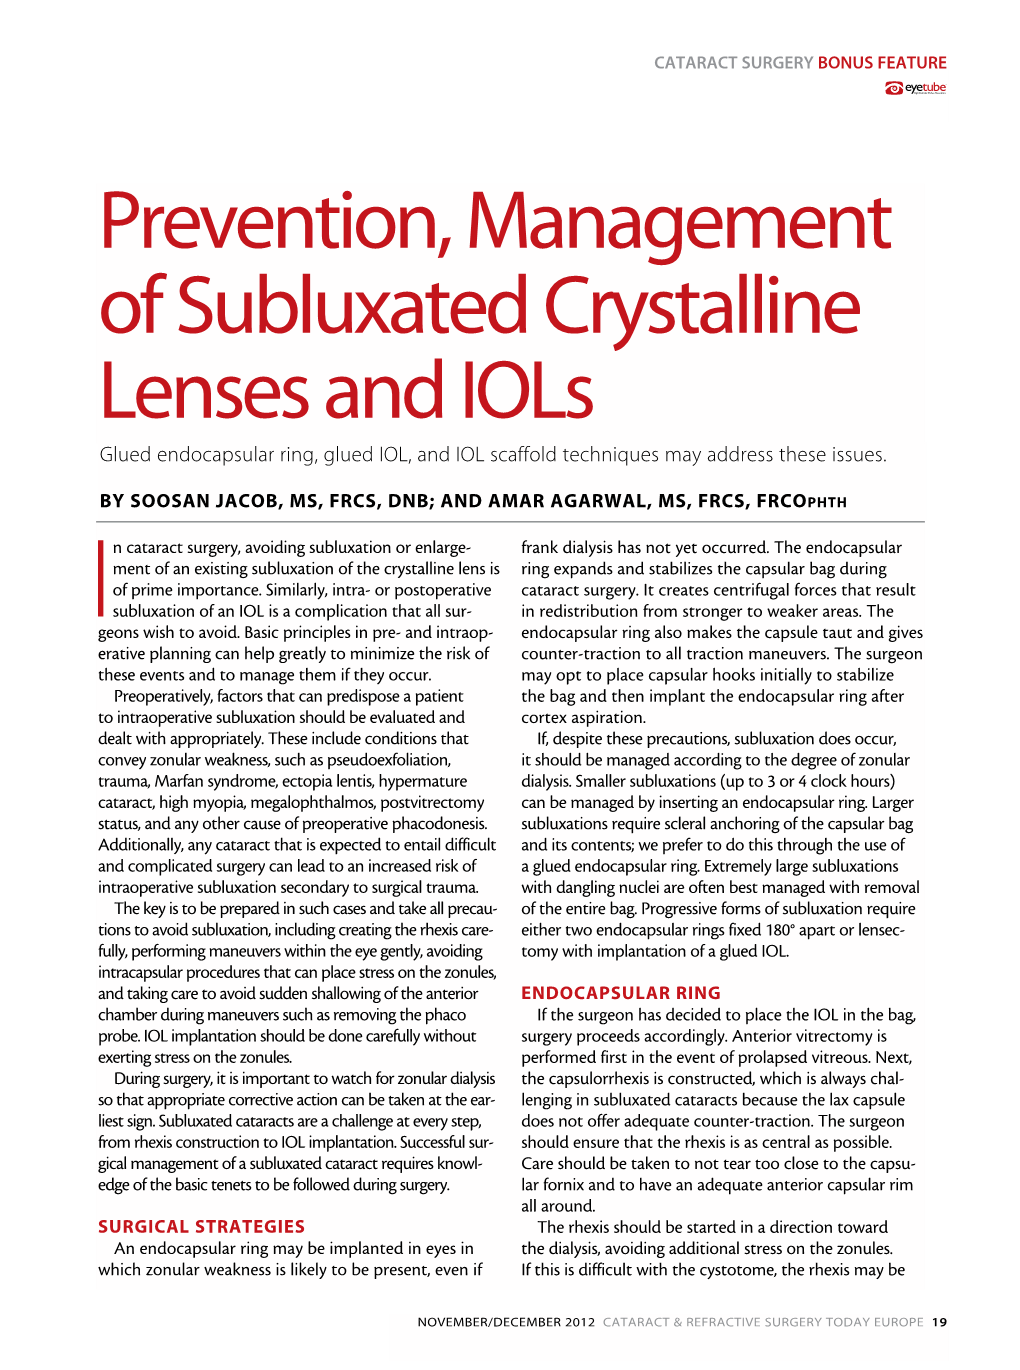 Prevention, Management of Subluxated Crystalline Lenses and Iols Glued Endocapsular Ring, Glued IOL, and IOL Scaffold Techniques May Address These Issues